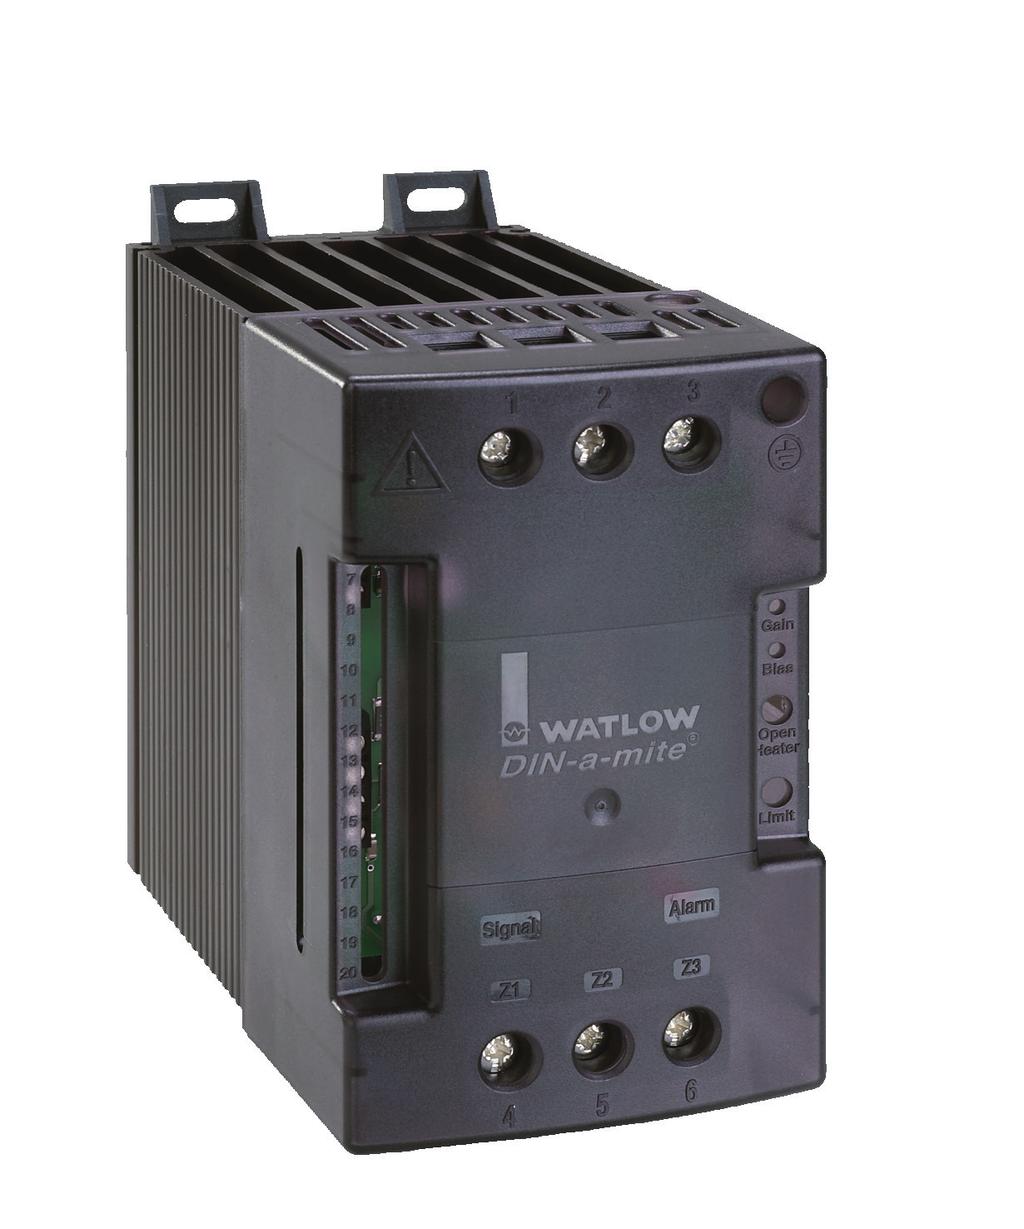 DIN-A-MITE C TOTAL CUSTOMER SATISFACTION 3 Year Warranty SCR Power Controller Delivers Up To 80 Amperes in a Compact Package The DIN-A-MITE C silicon controlled rectifier (SCR) power controller